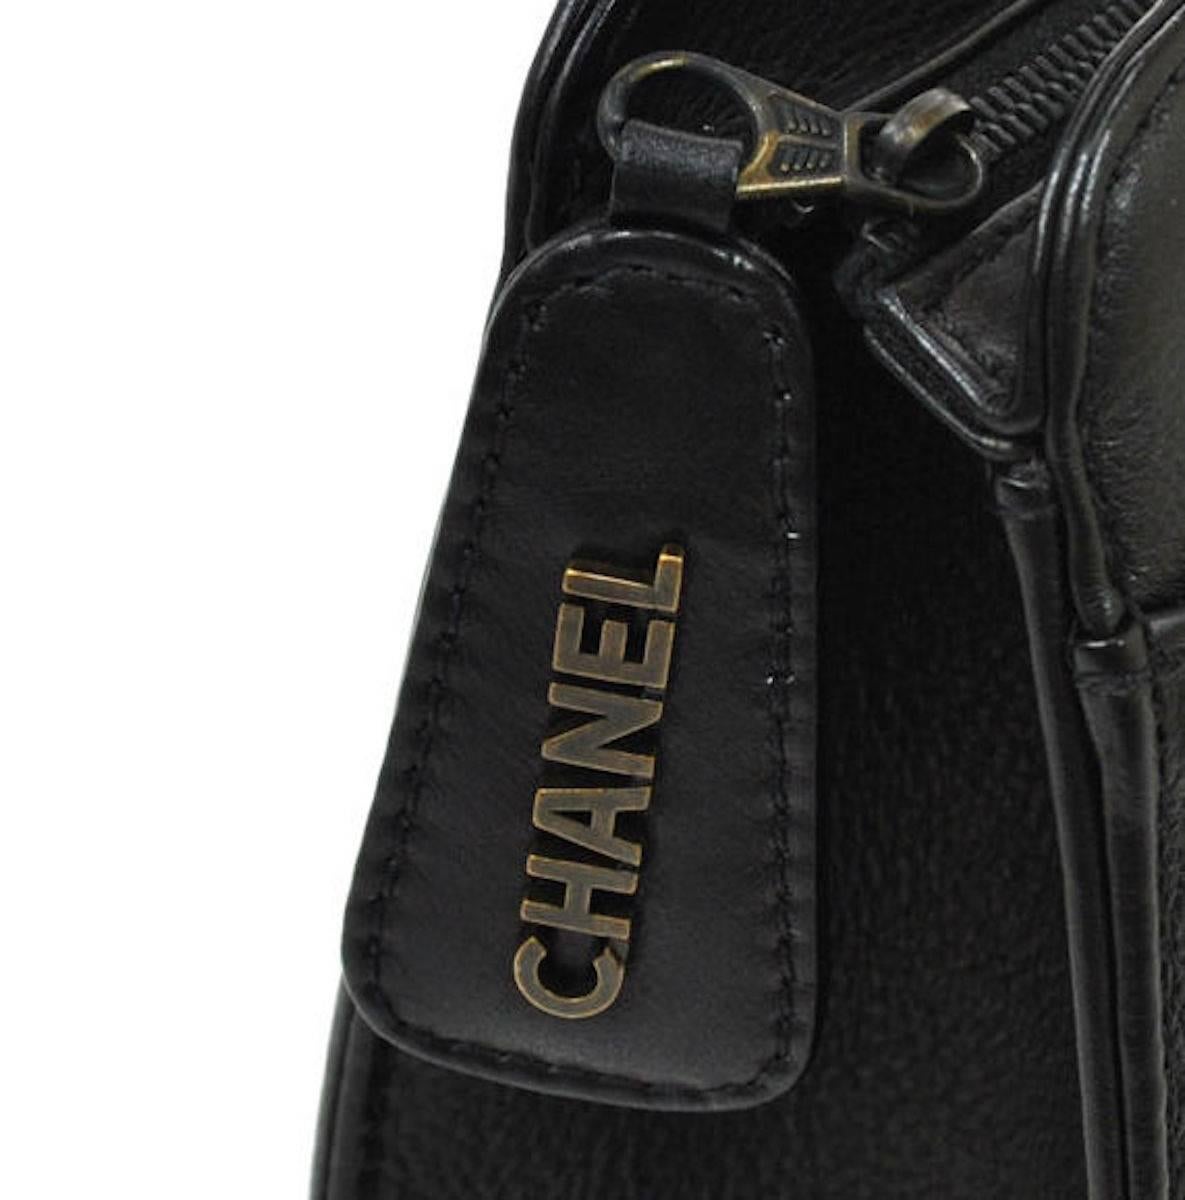 Chanel Leather Shopper Top Handle Bag With Accessories 

Leather
Antique gold tone hardware
Zipper closure
Date code 
Made in France
Strap drop 6